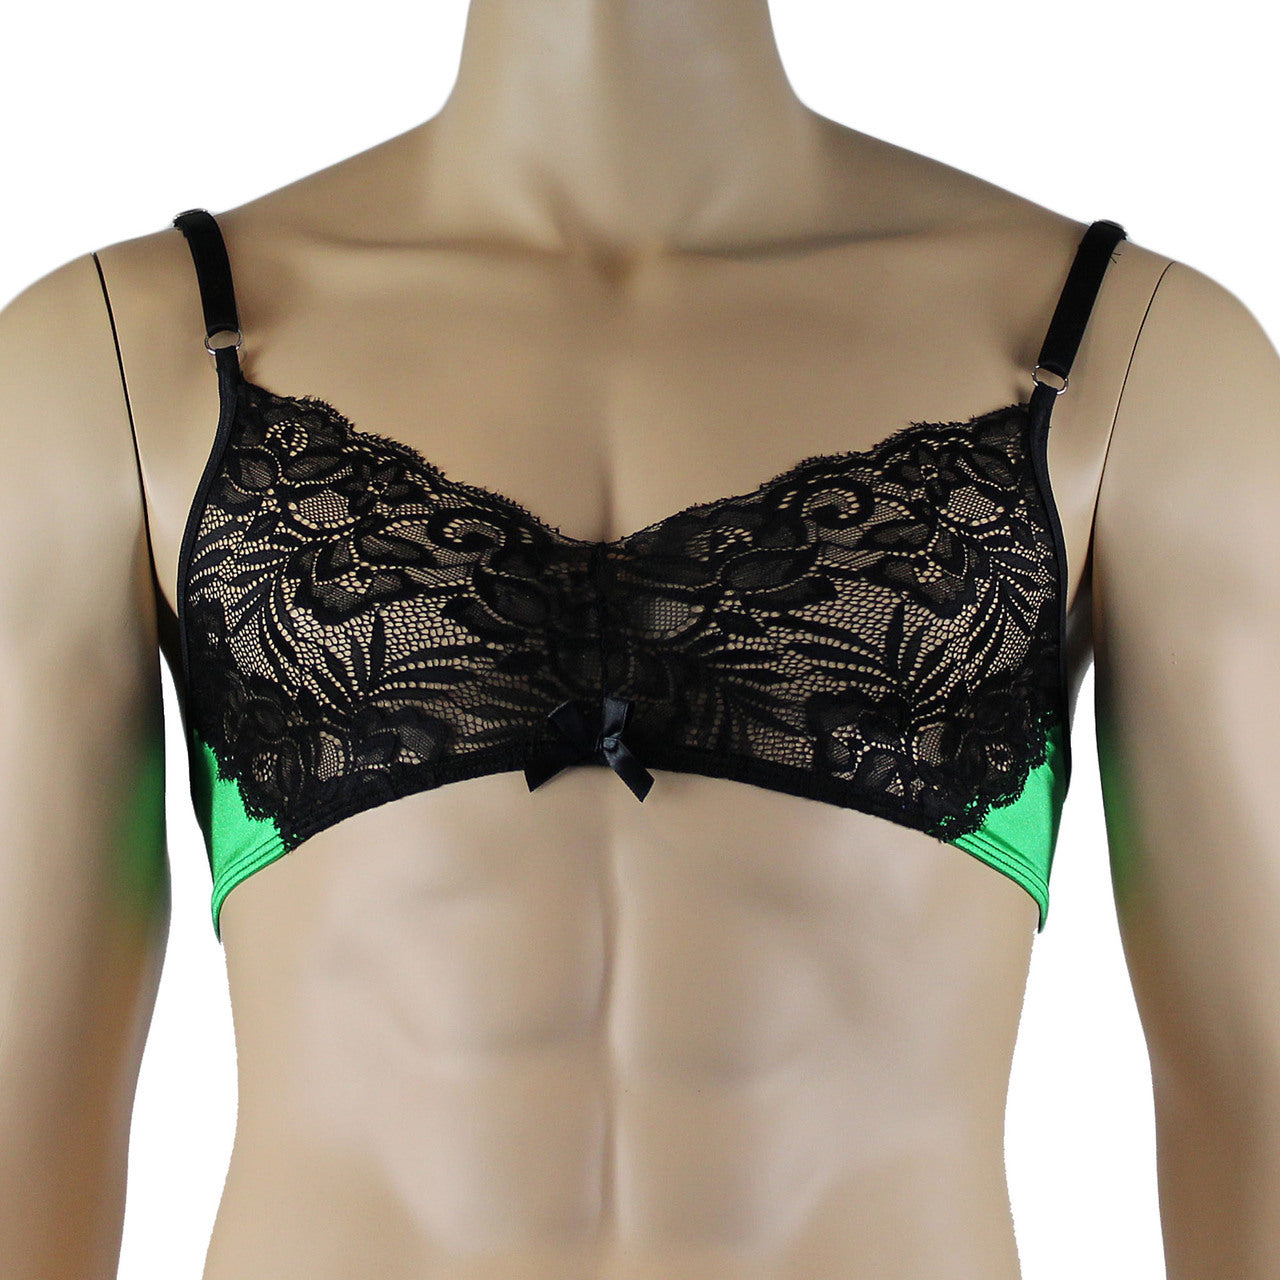 Mens Risque Bra Top and Thong (green and black plus other colours)